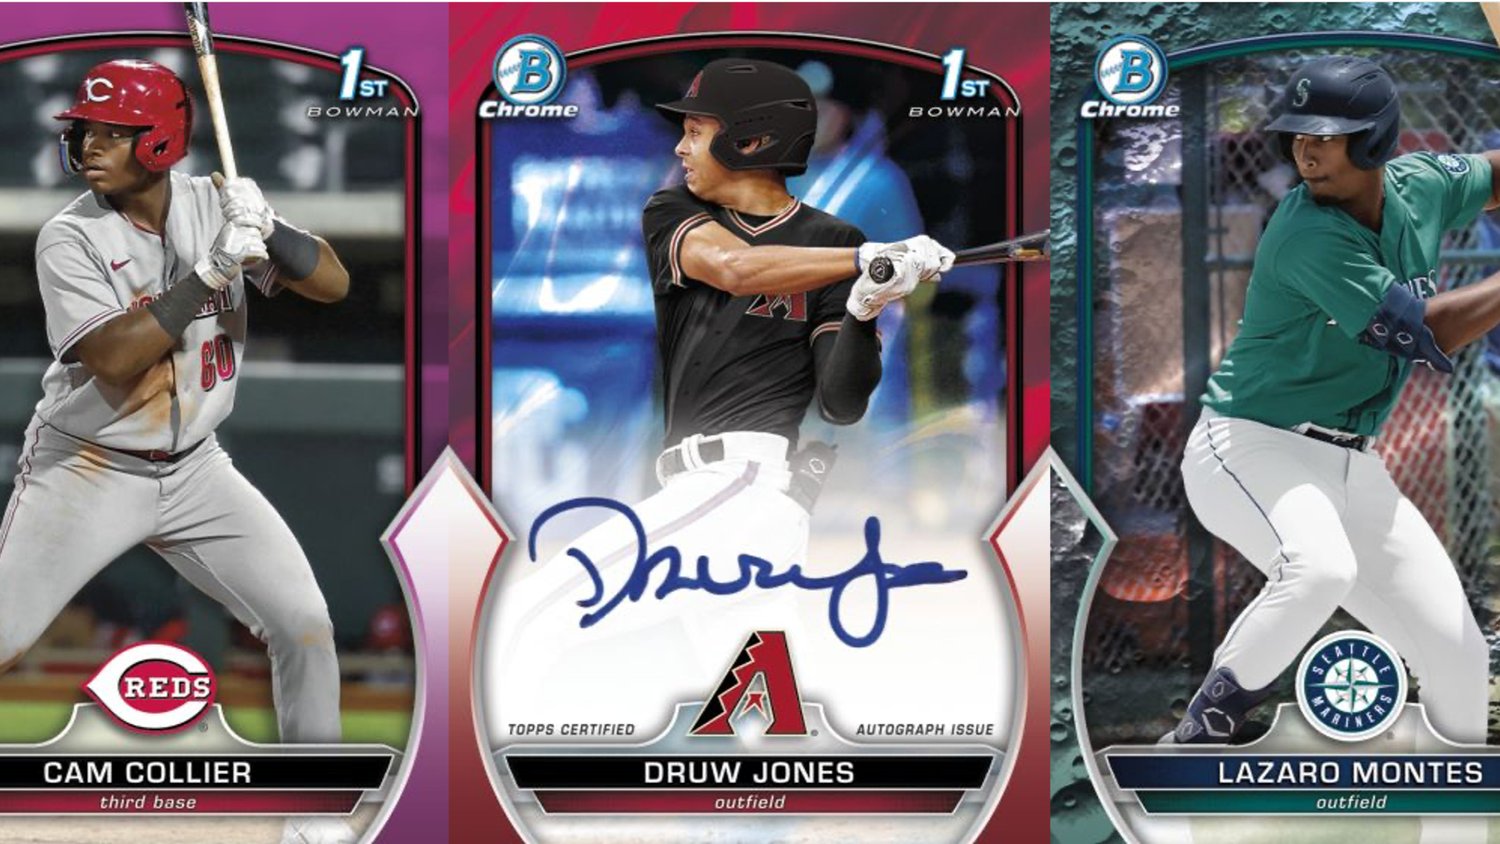 Druw Jones, Son of Former MLB Slugger, Has All the Makings of a No